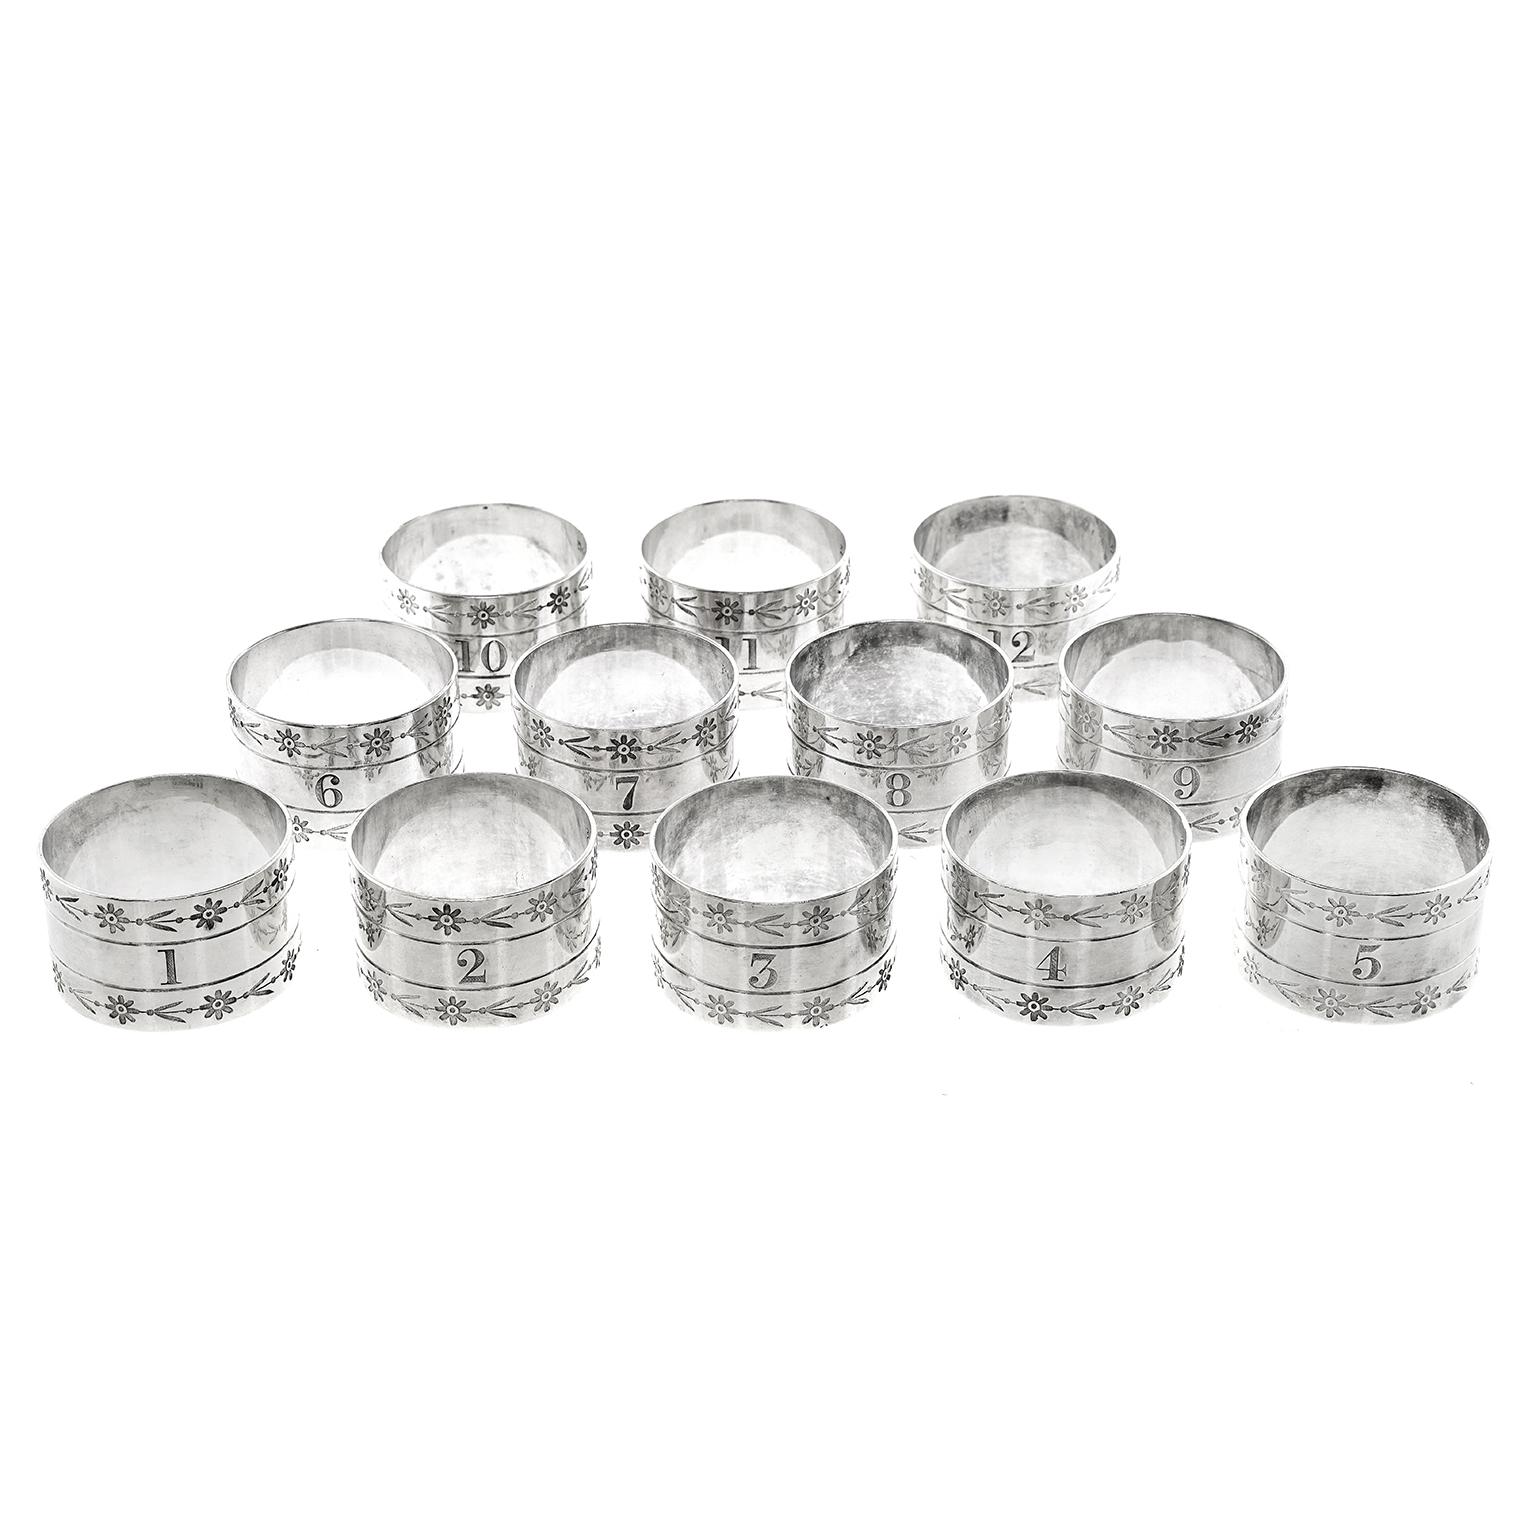 Circa 1849, Silver-plate, by Elkington & Co., Birmingham, England.  Found in their original box, this gorgeous set of silver-plate napkin rings by the esteemed British Silver company, Elkington & Co, feature hand engraved bright cut flower